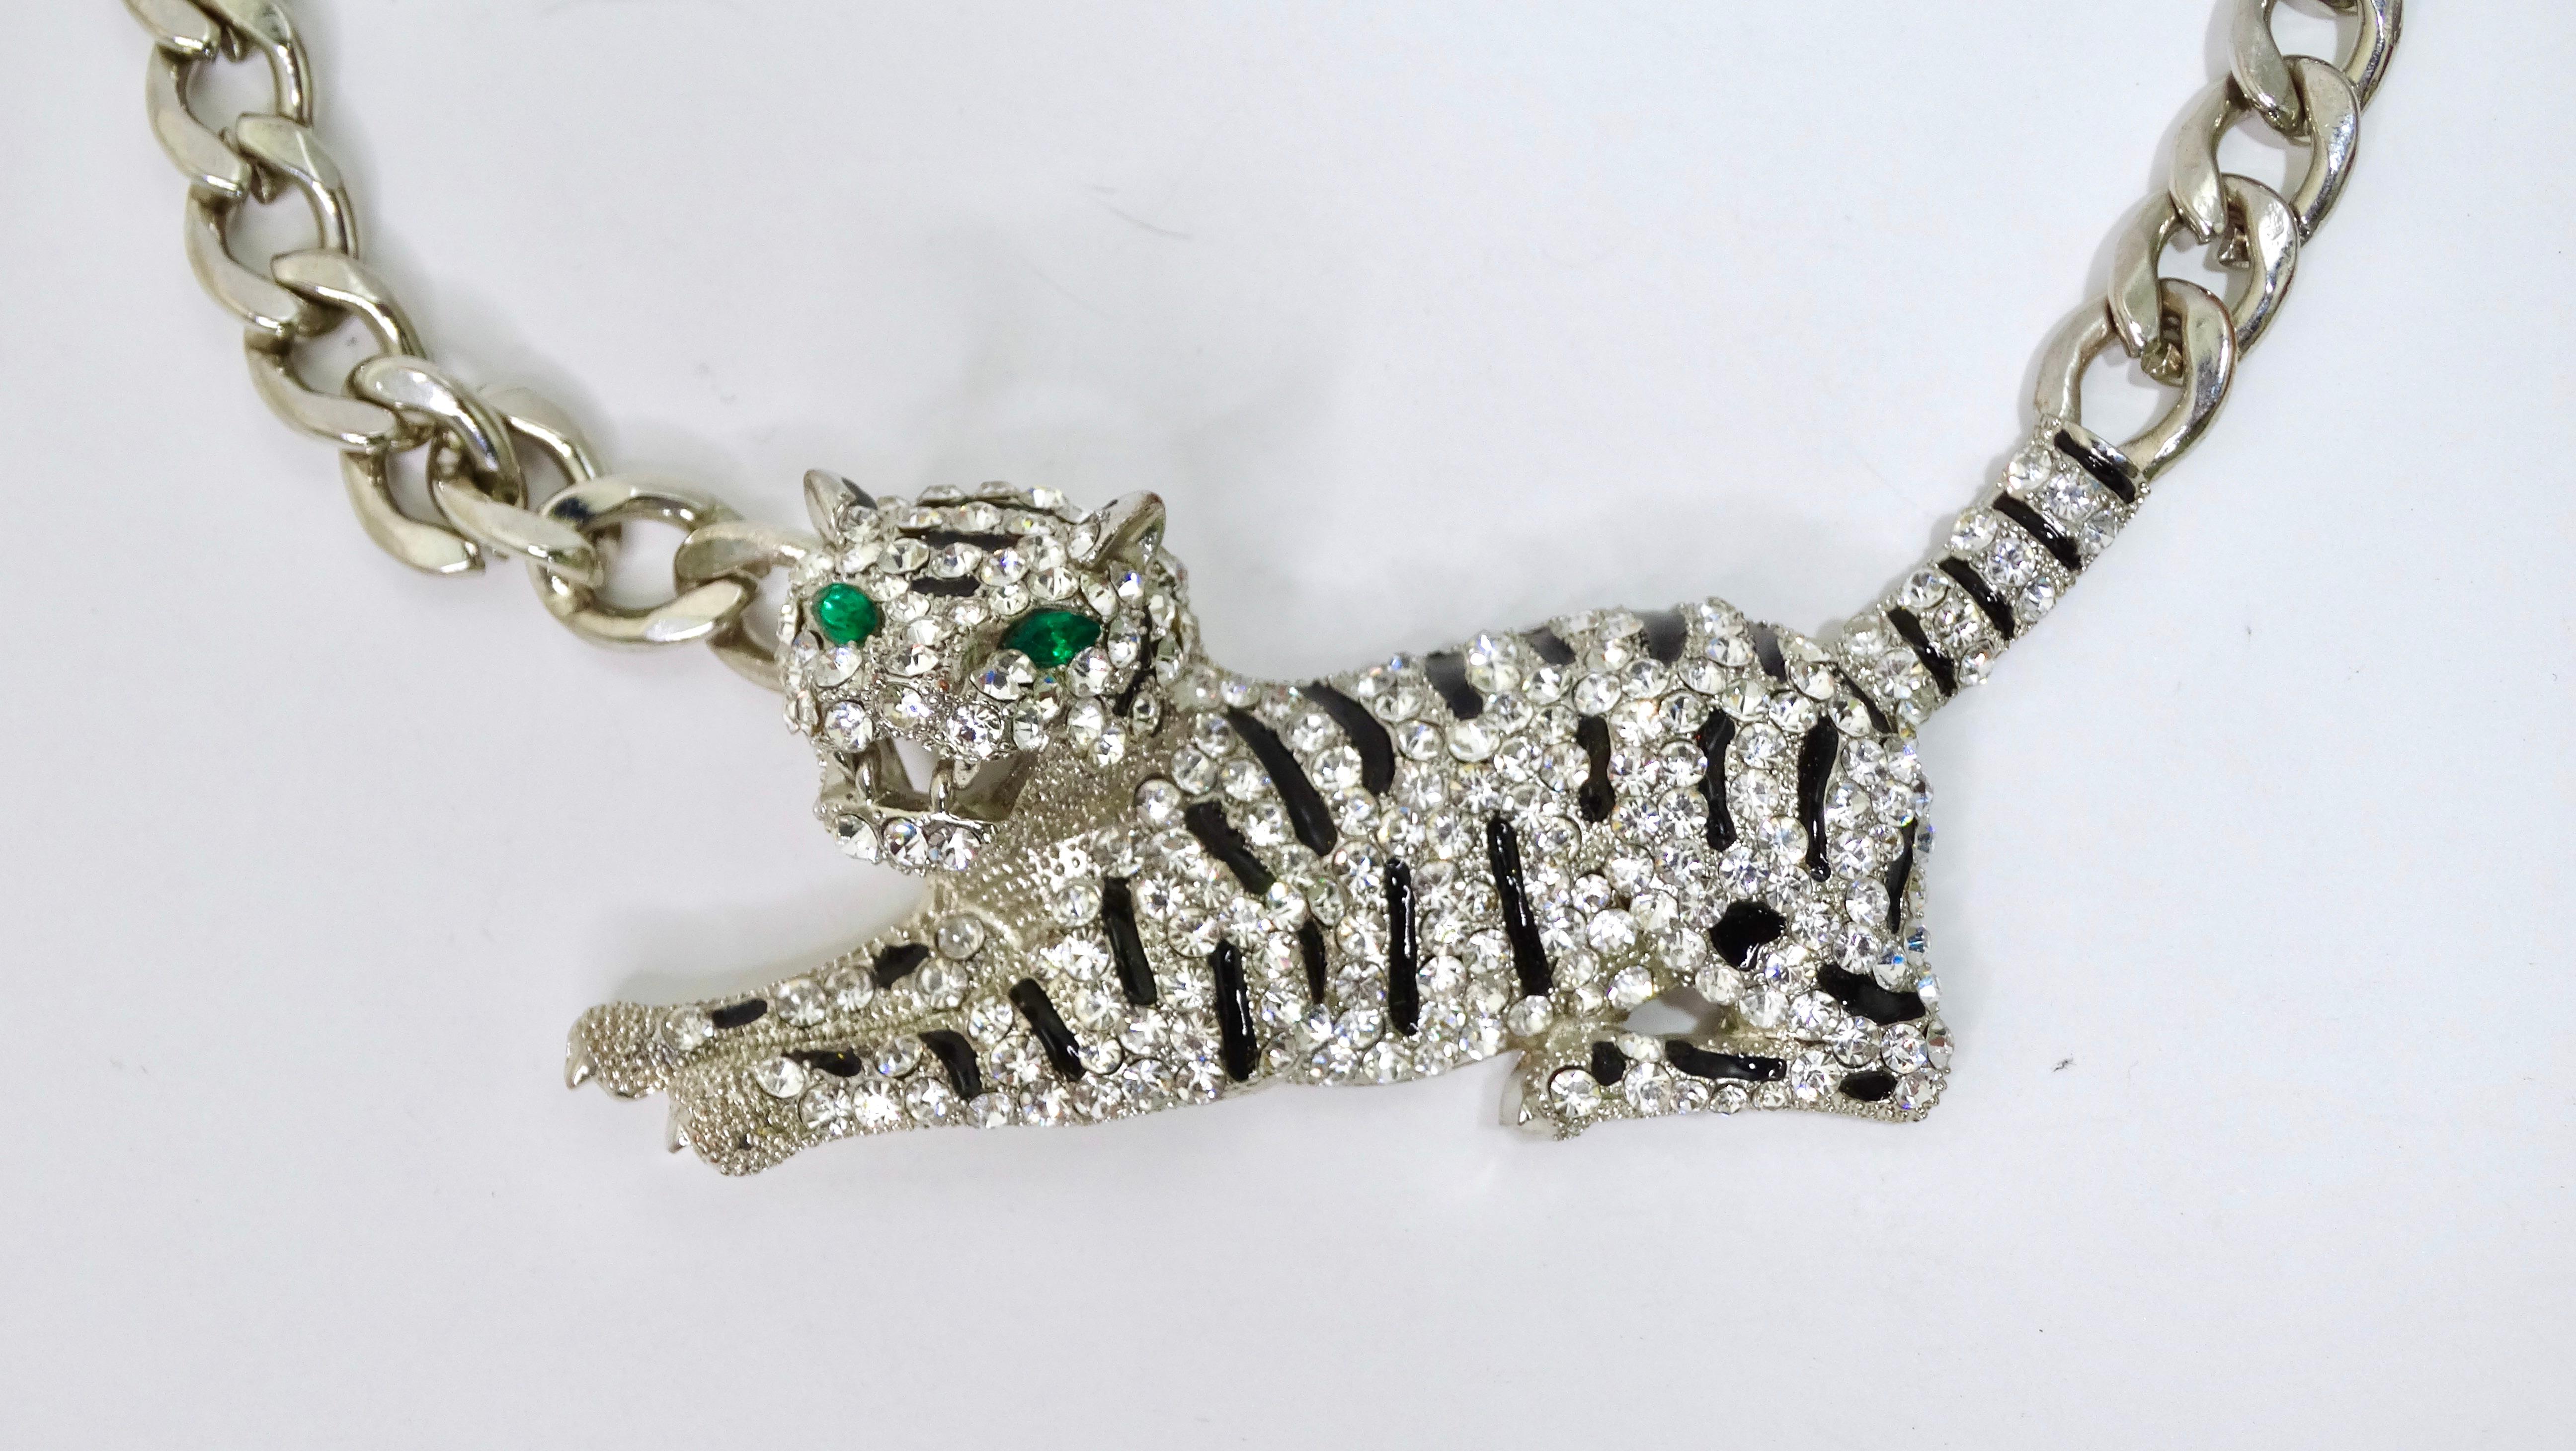 Get your hands on an amazing vintage necklace today! This necklace has a large tiger pendant that measures 3.75 inches by 1.5 inches and is completely embellished in clear and black crystals with fierce green crystals for the eyes. As we all know,